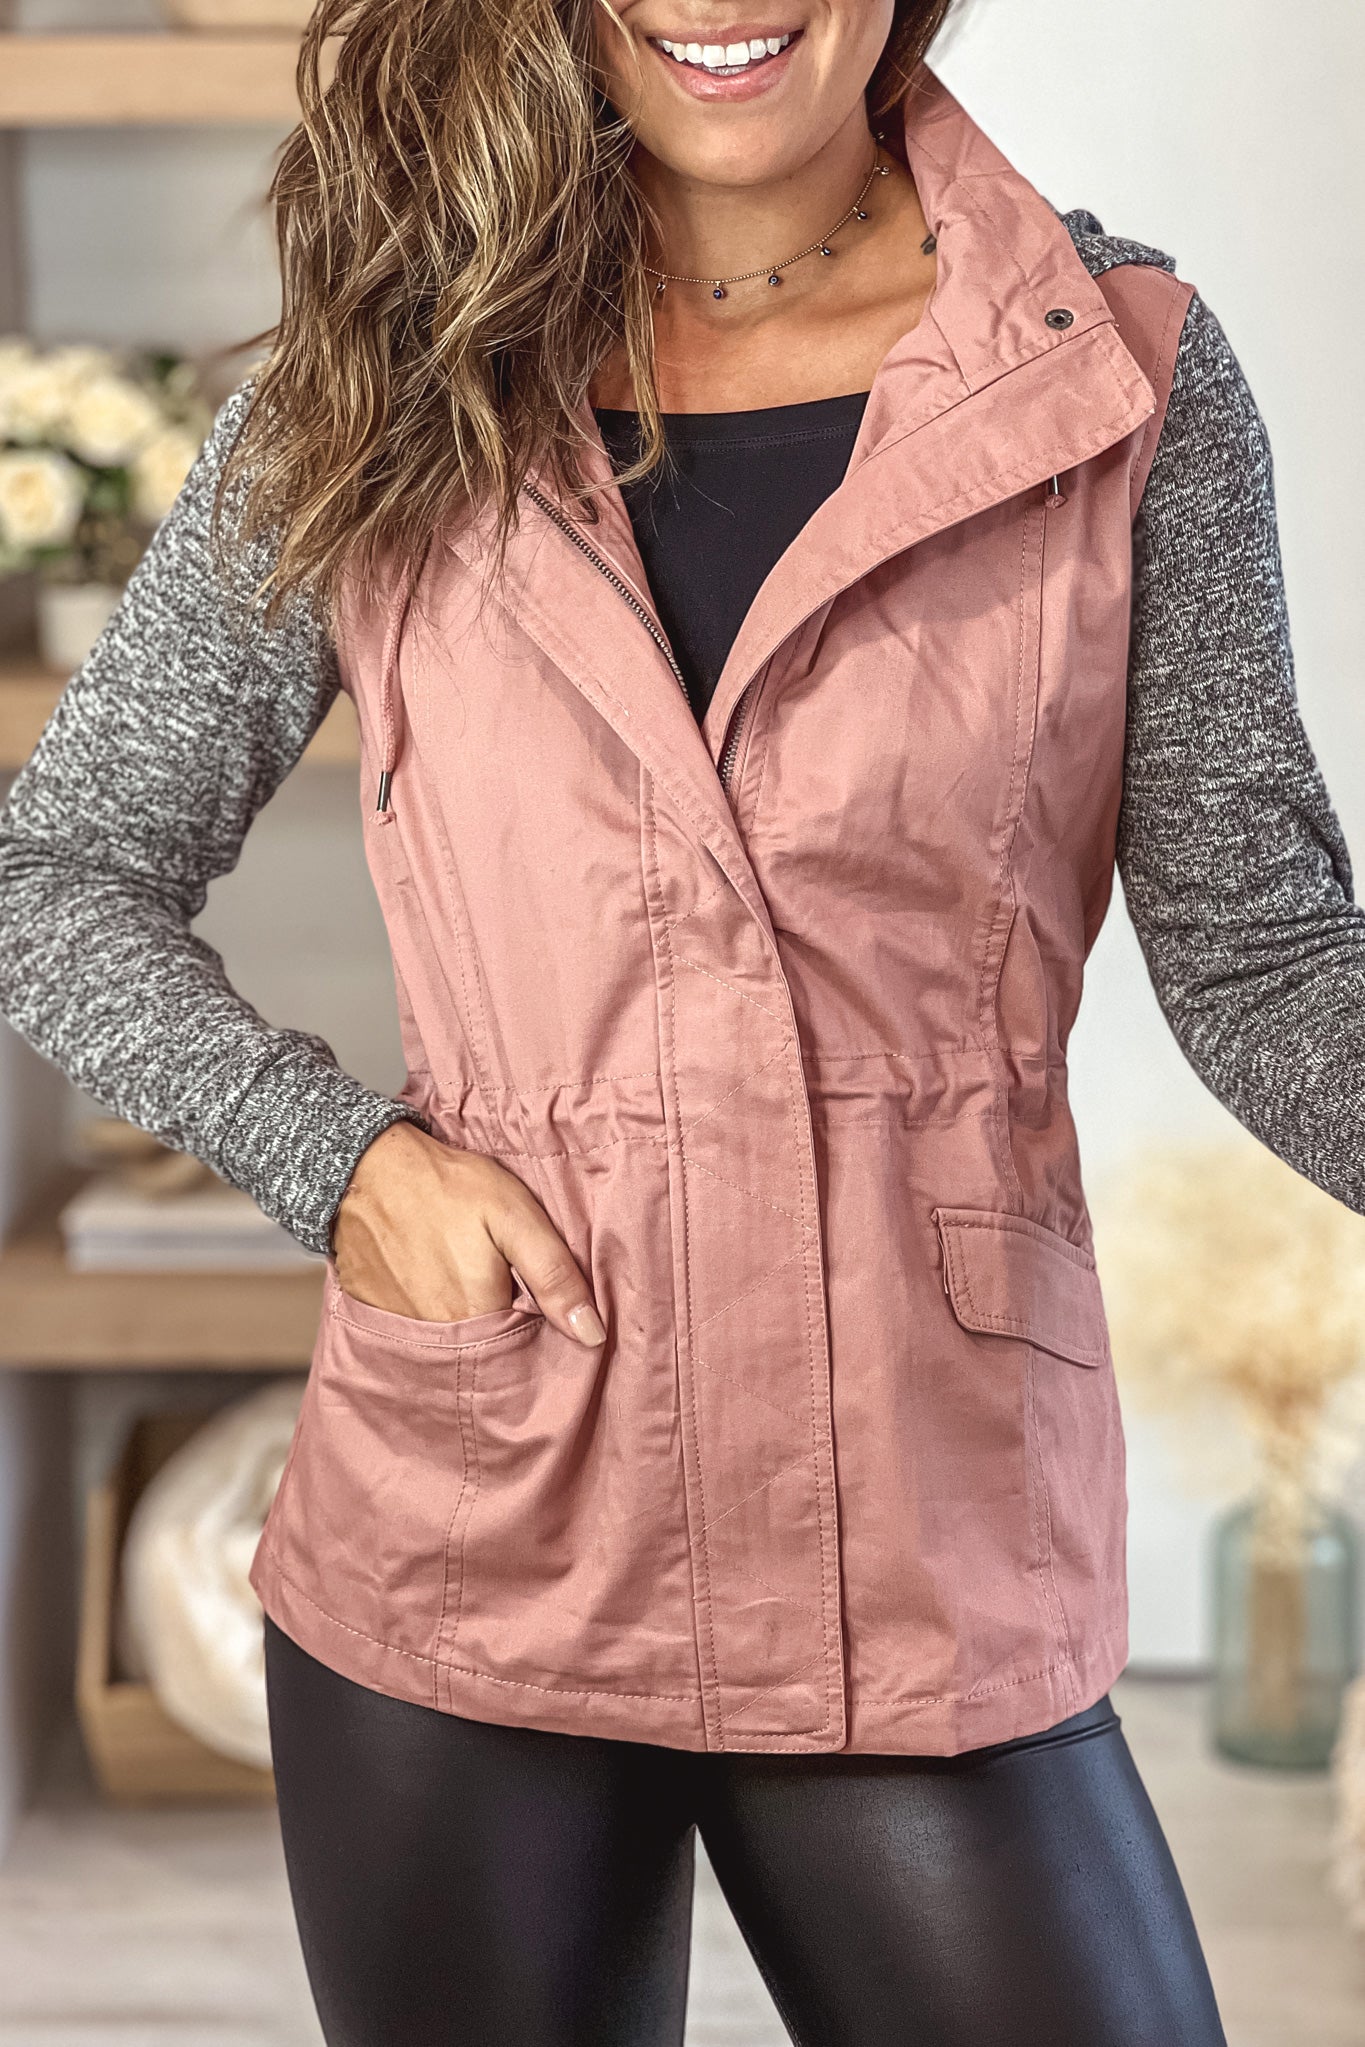 mauve jacket with gray hood and sleeves